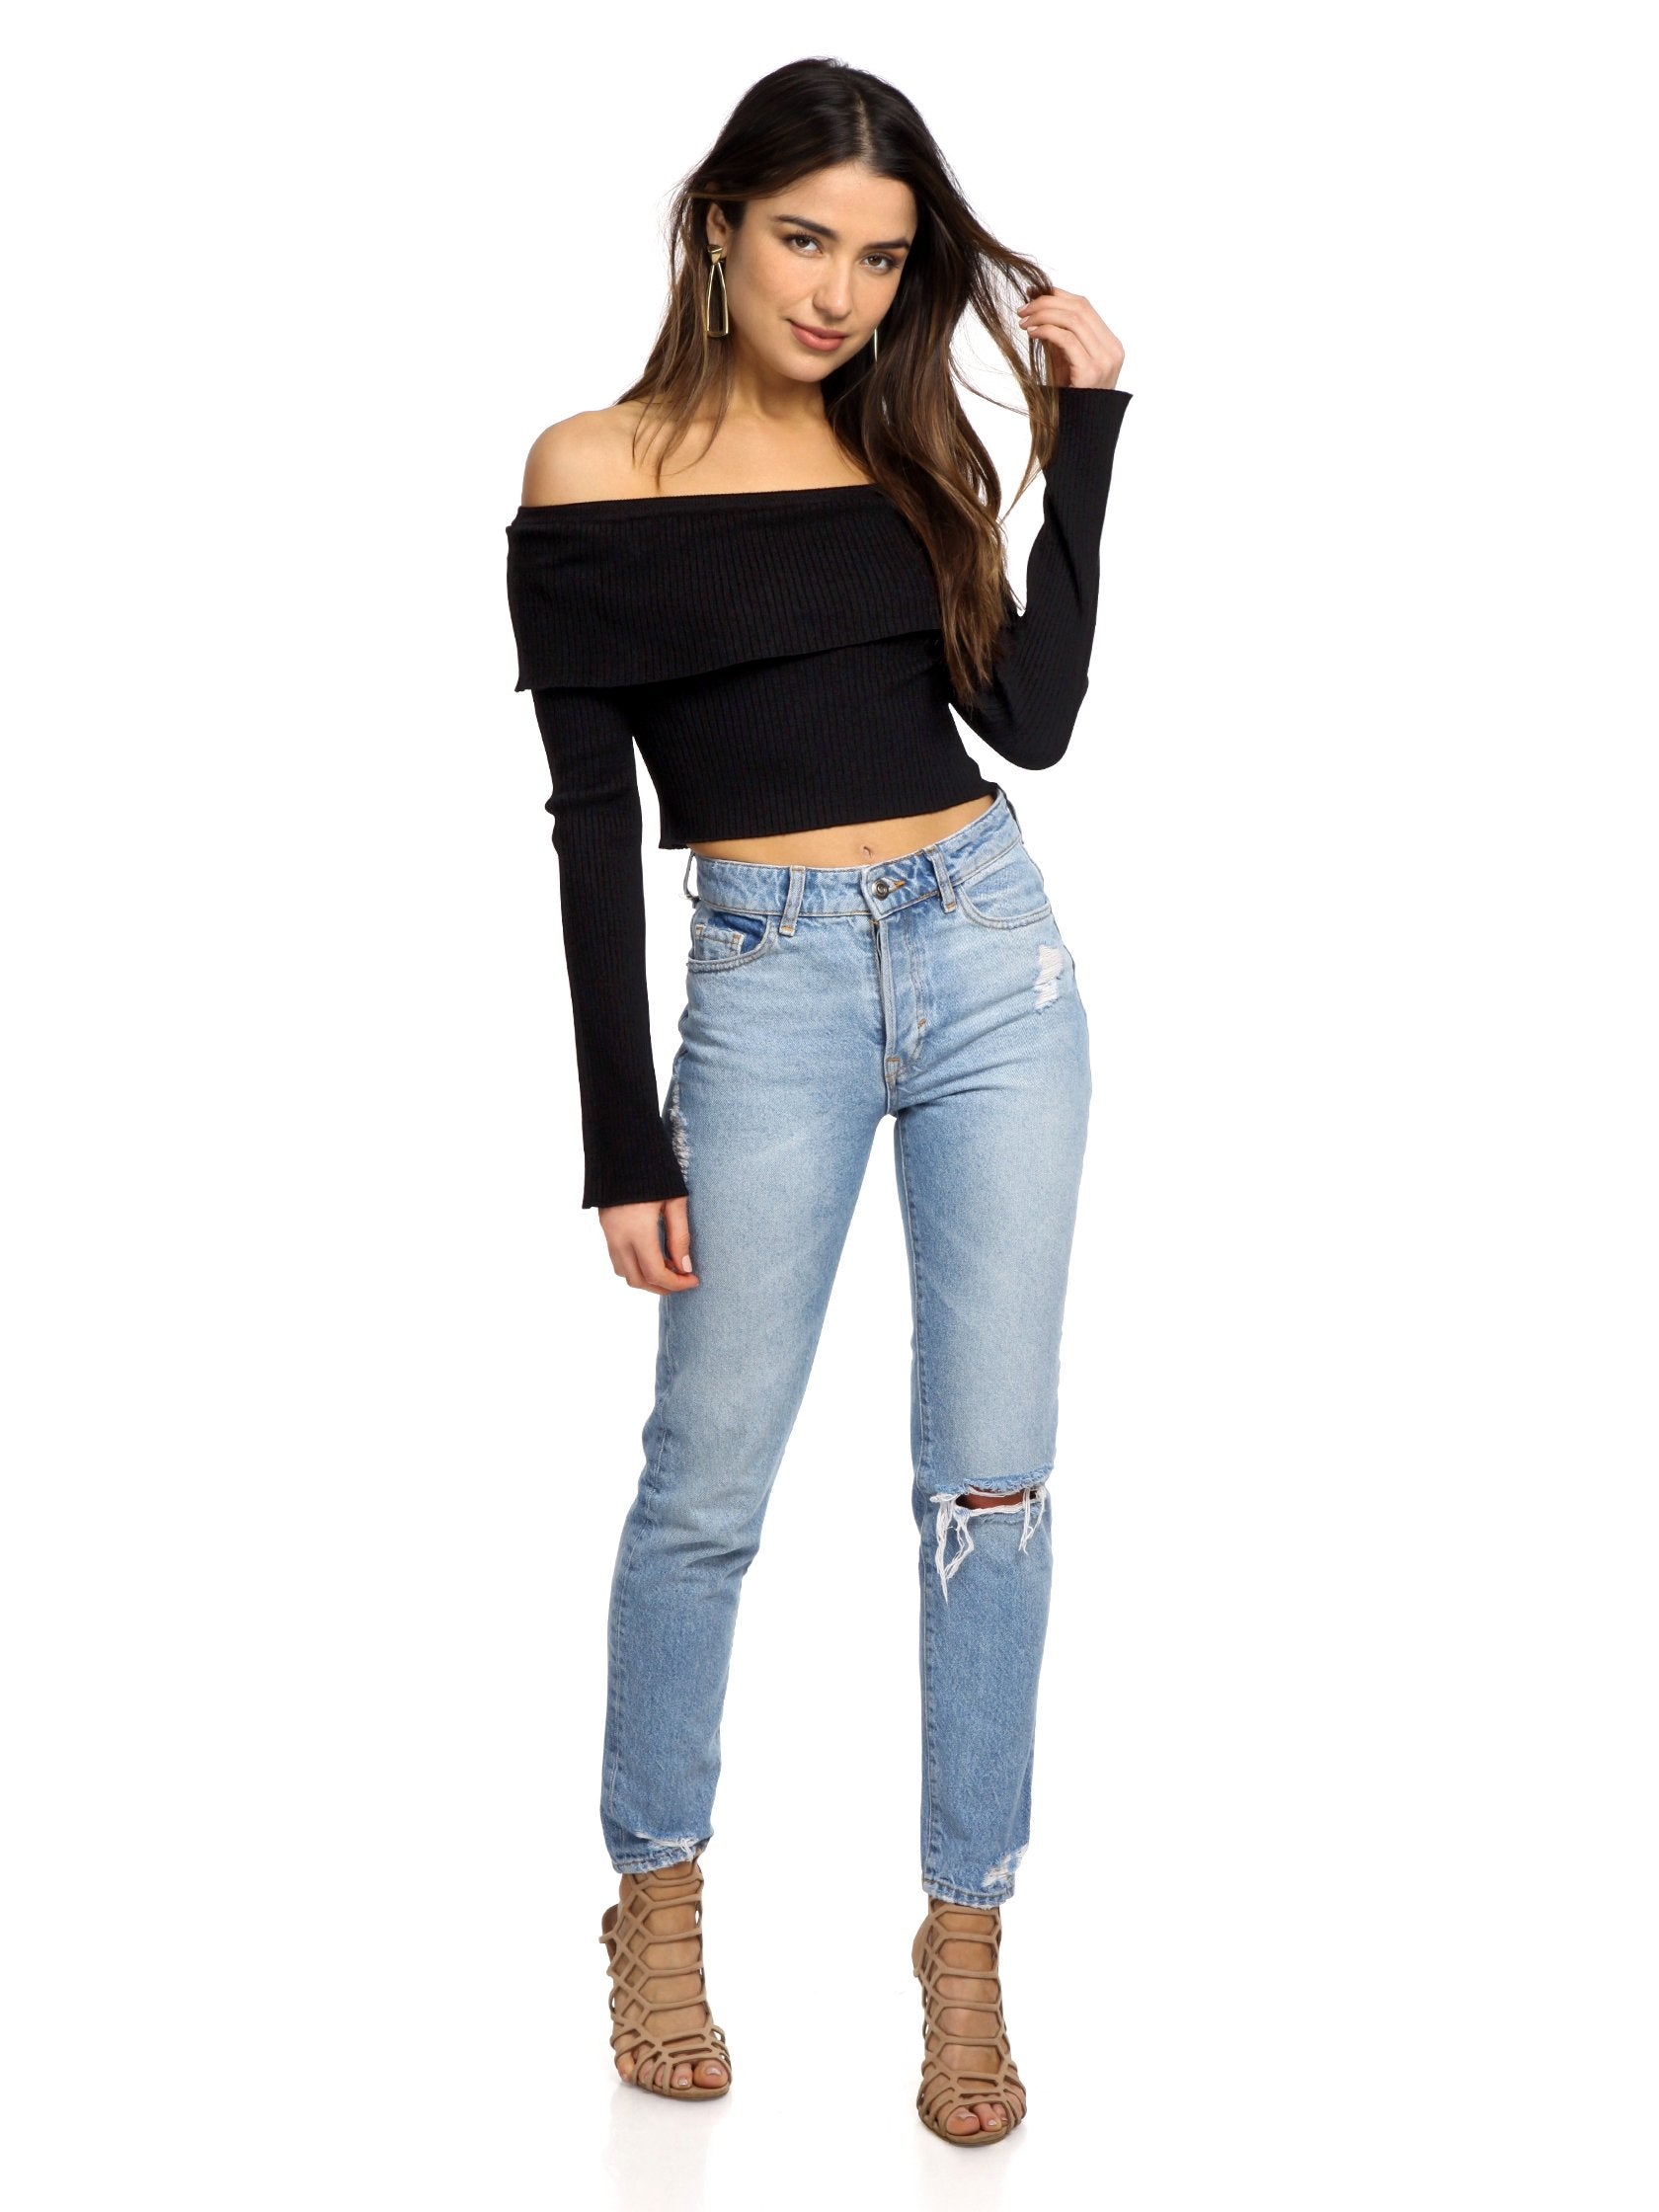 Girl wearing a top rental from FashionPass called Sadie Crop Top